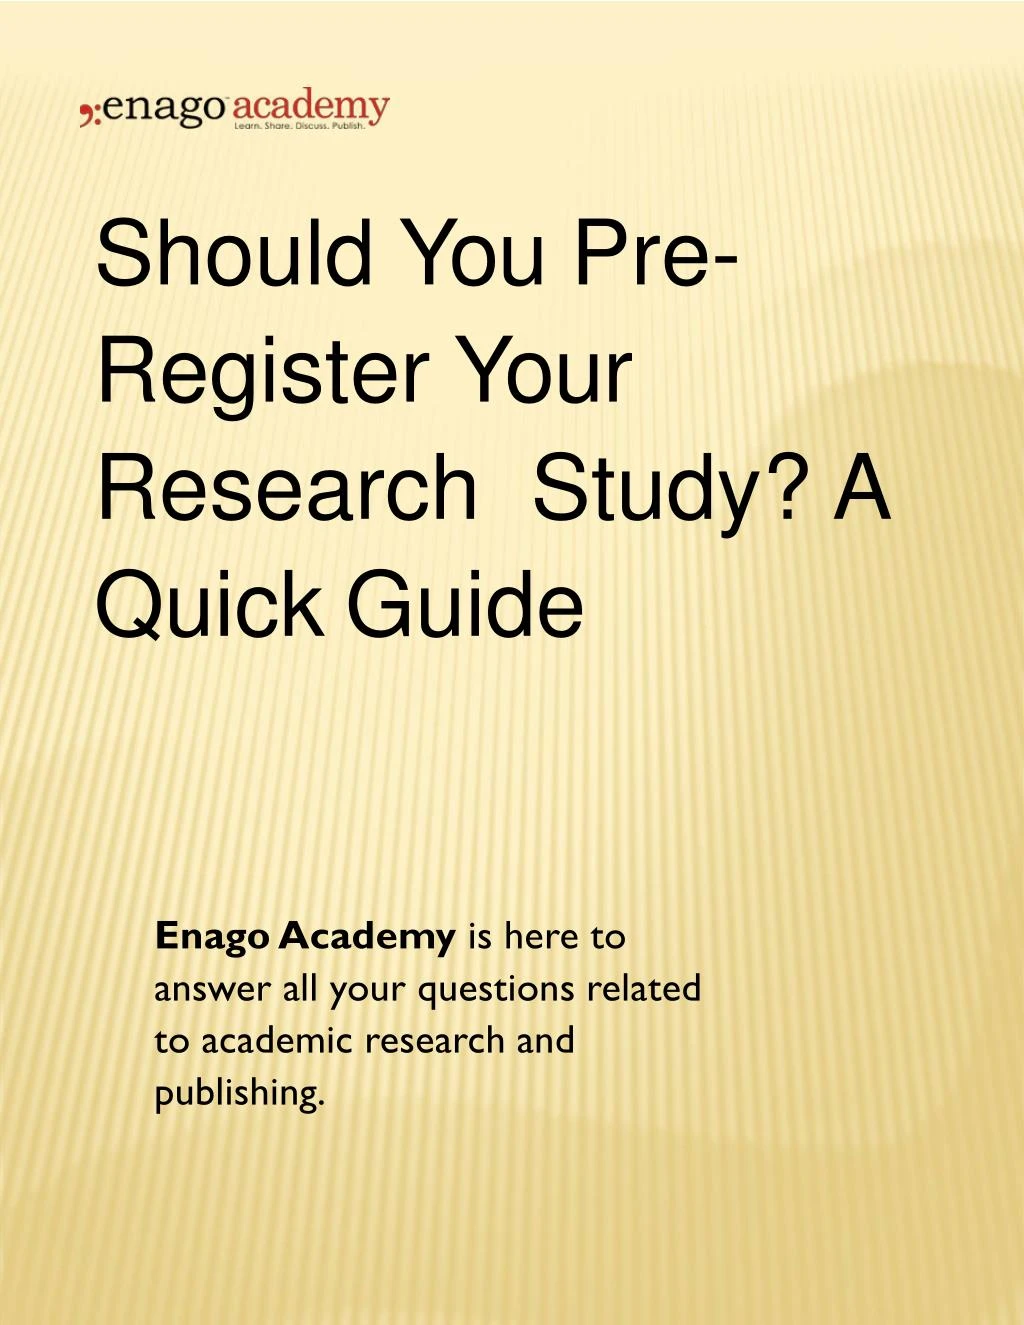 should you pre register your research study